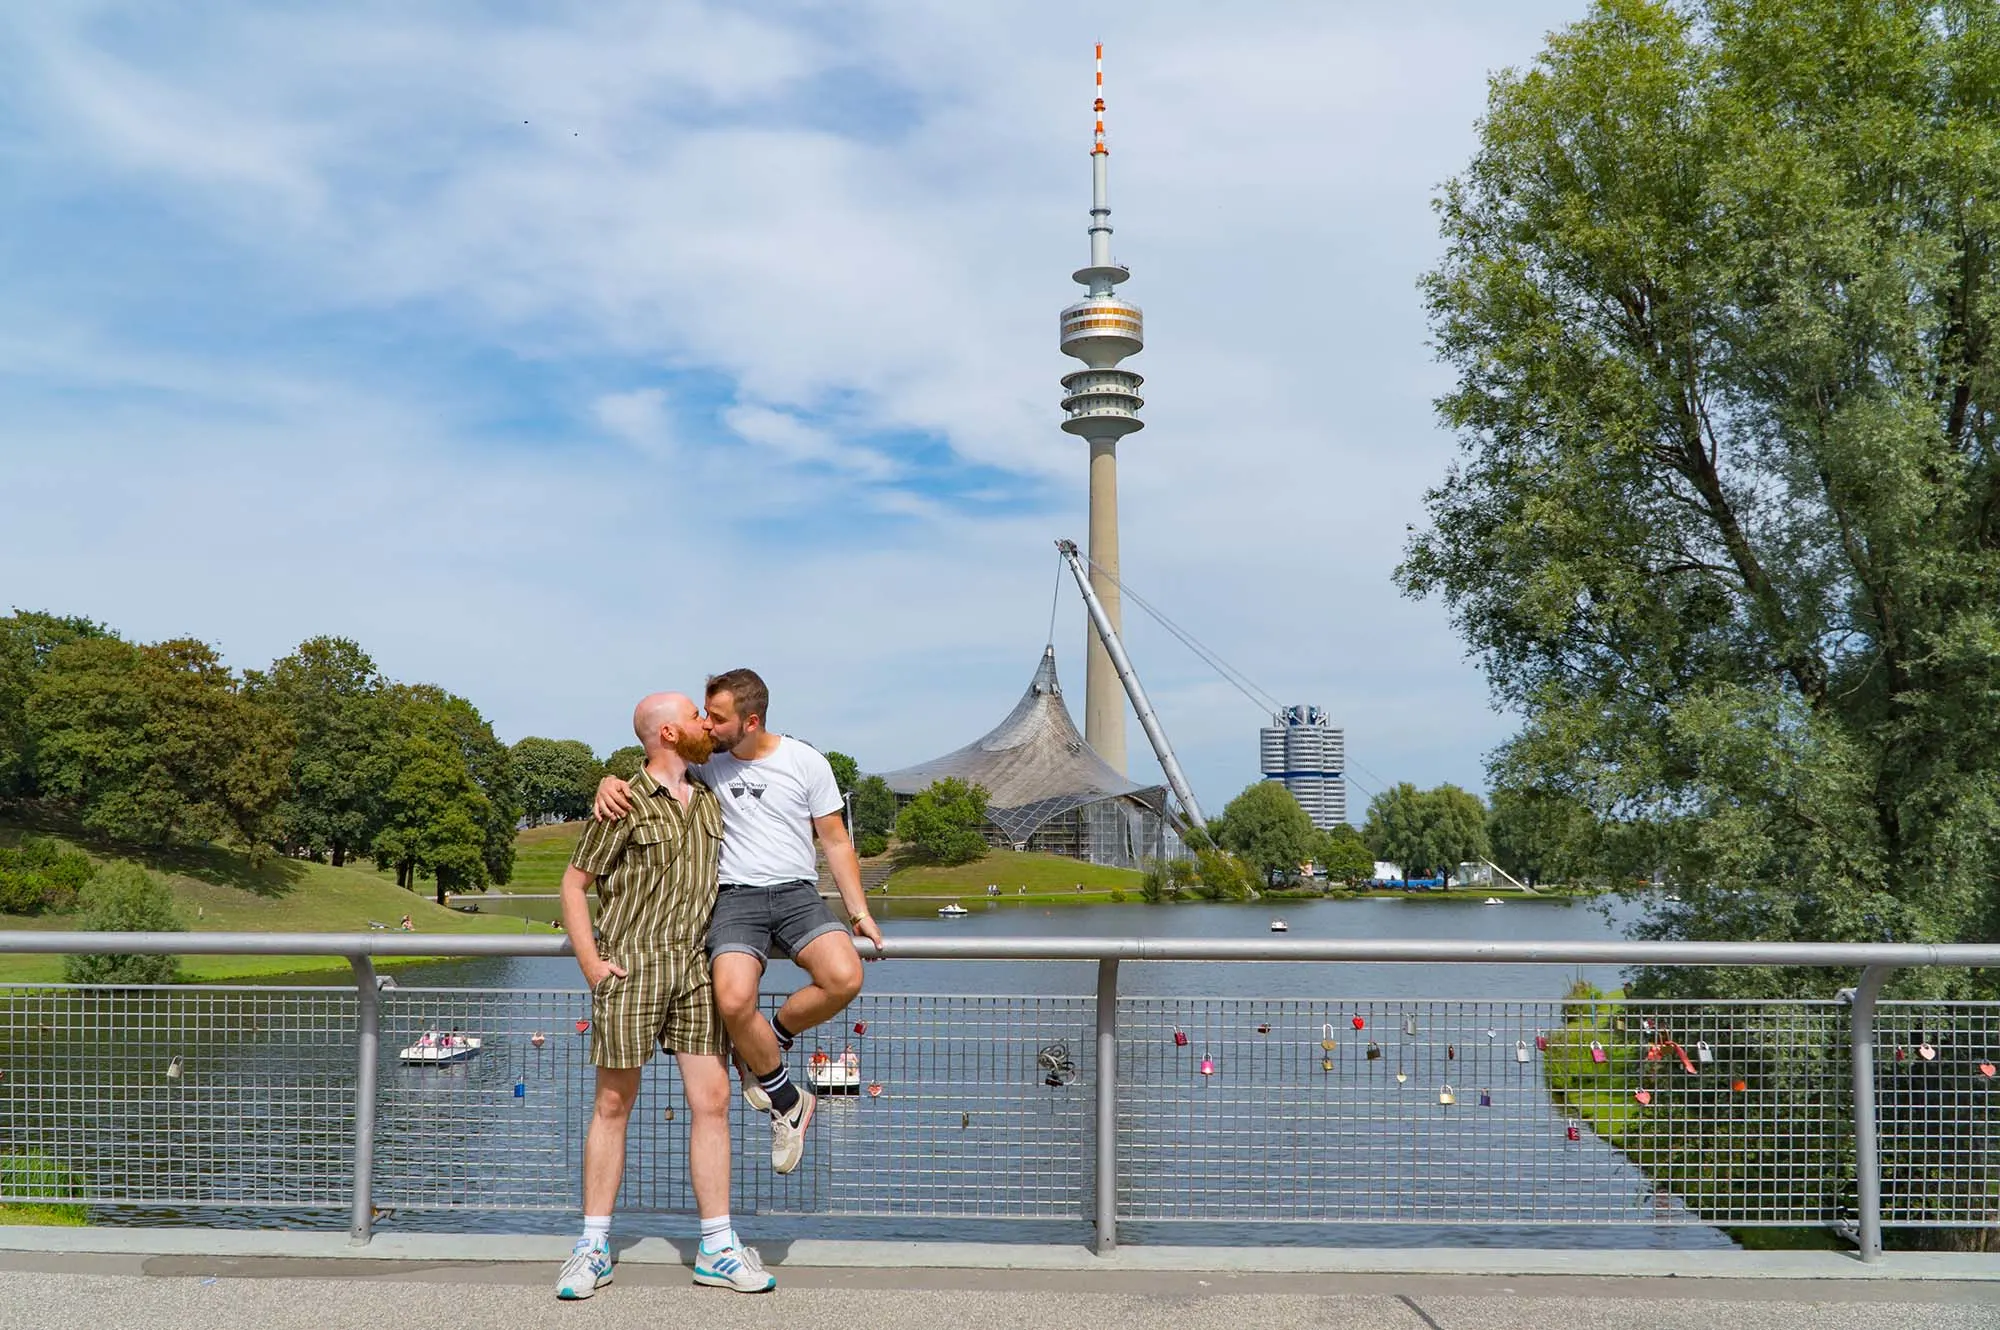 Munich Gay City Trip Break at Olympic Park with the TV Tower in the background © Coupleofmen.com